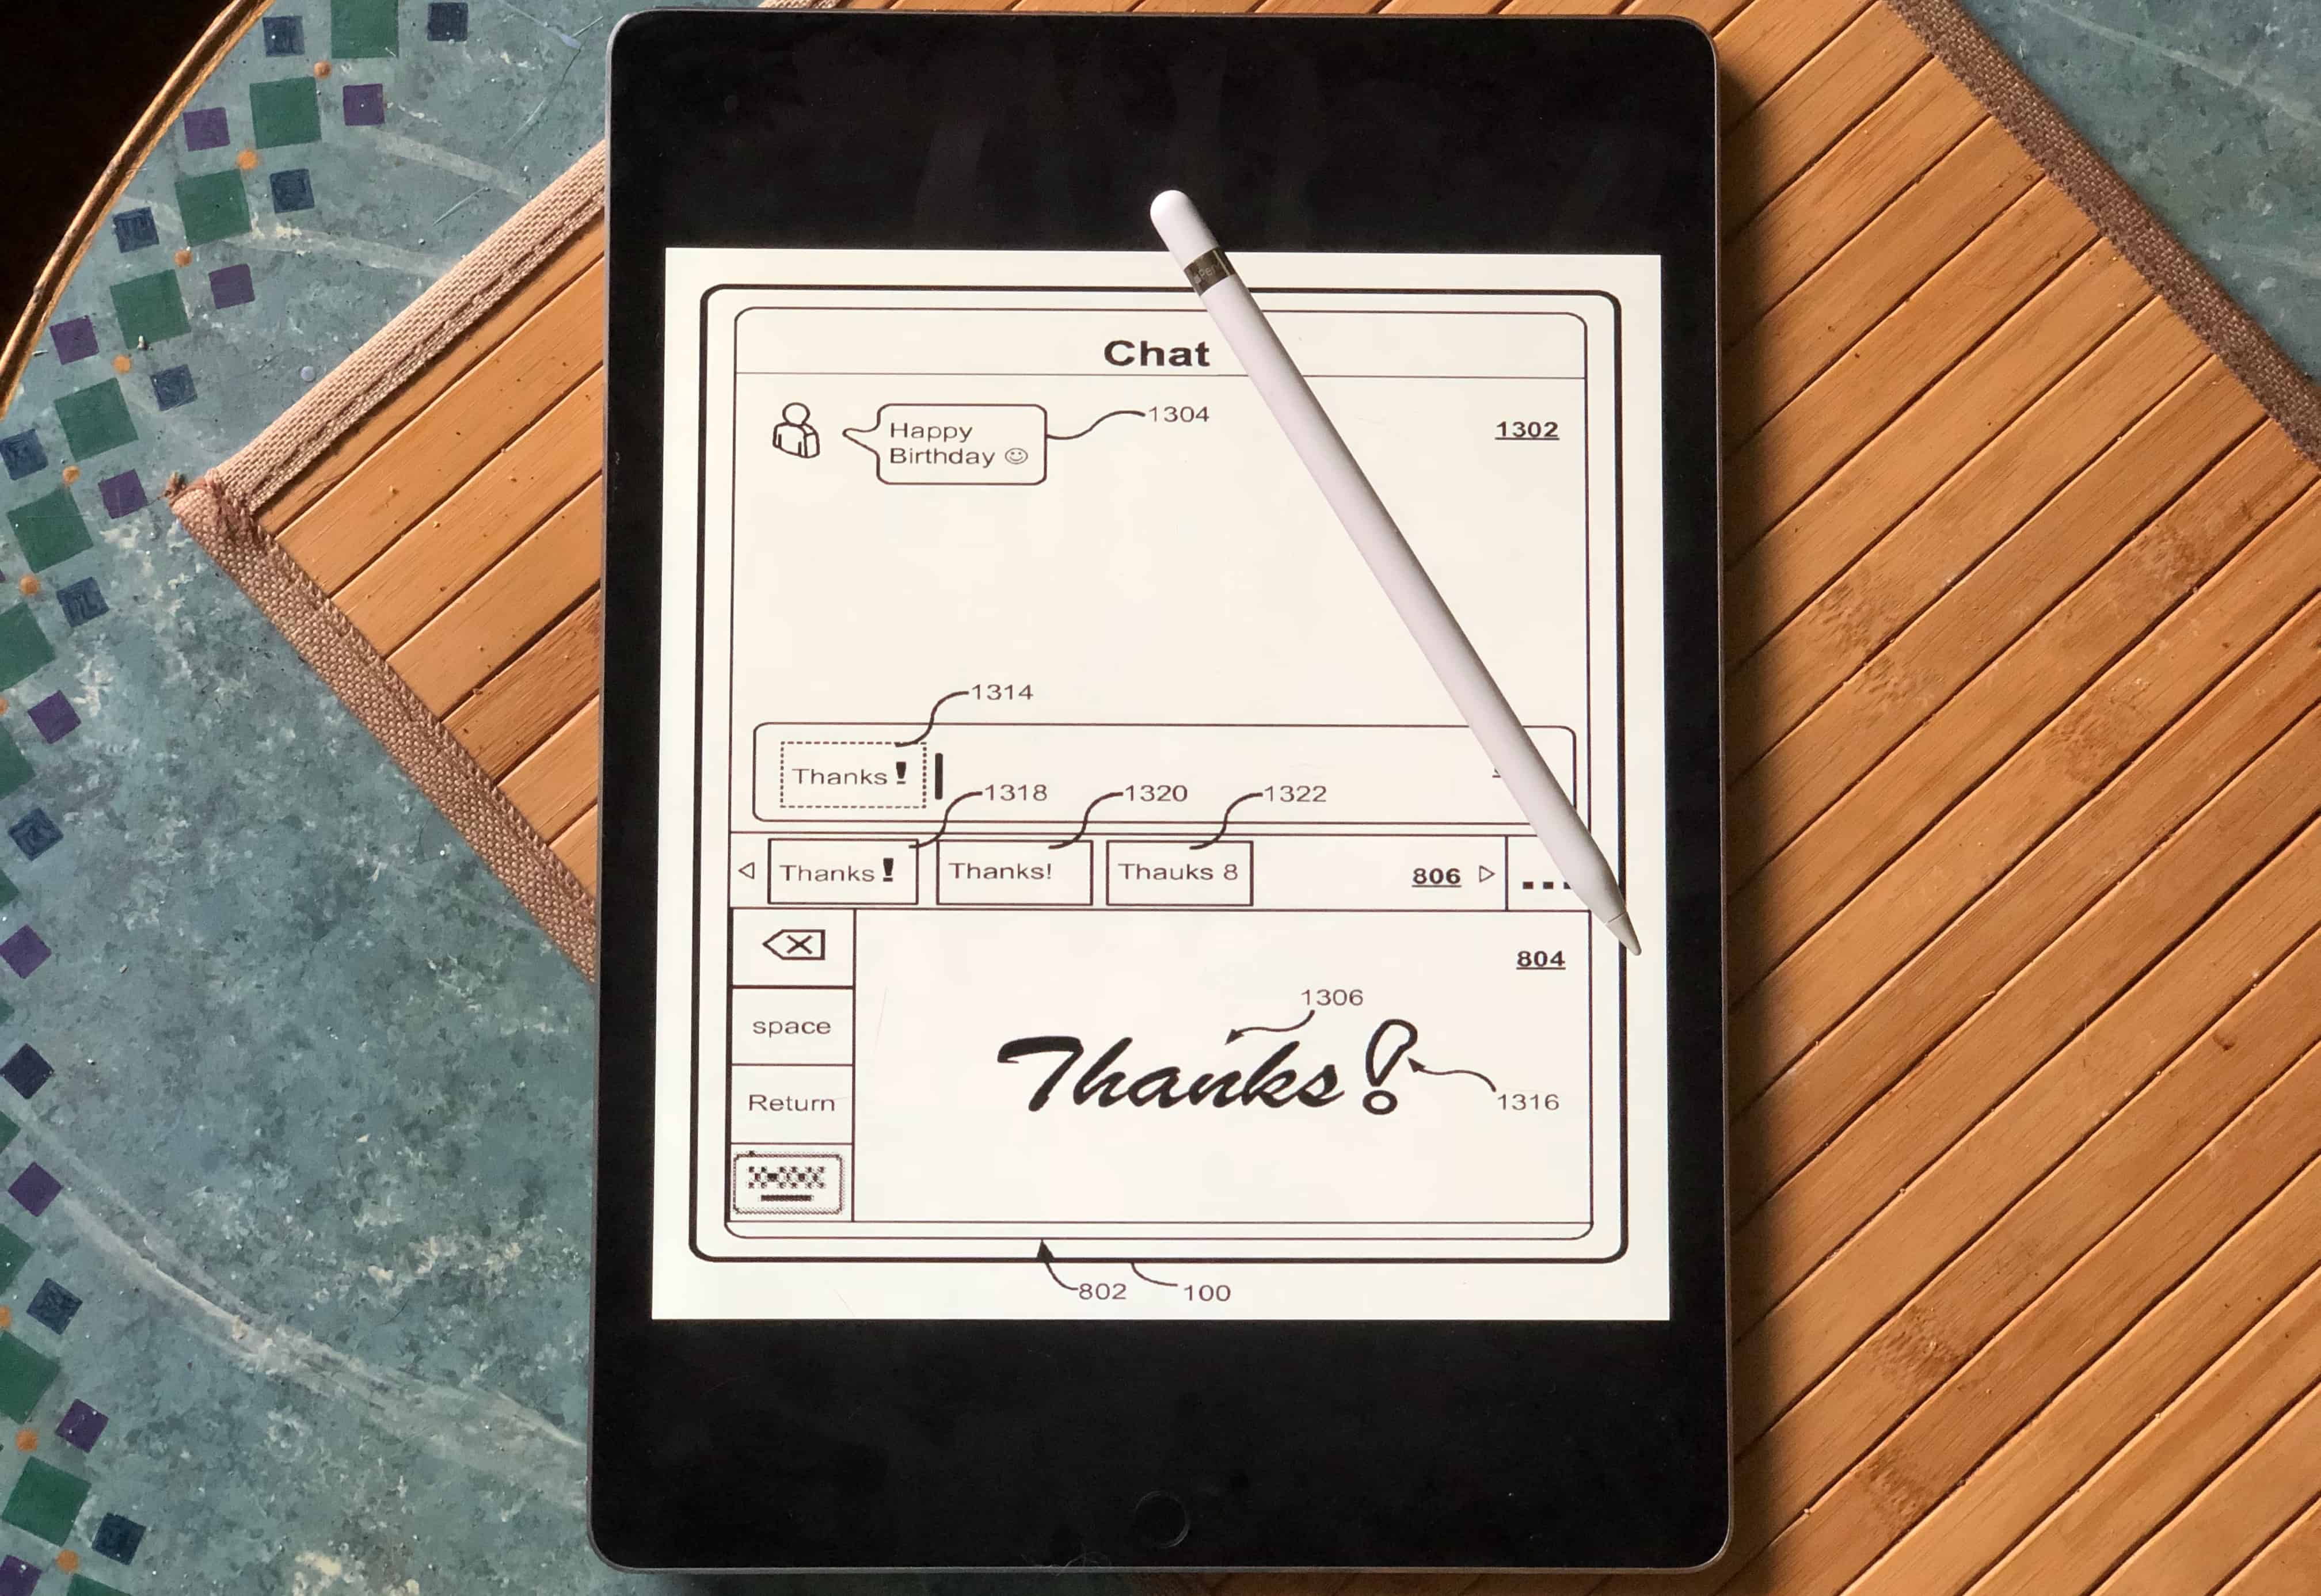 iPad and iPhone handwriting recognition is a real possibility